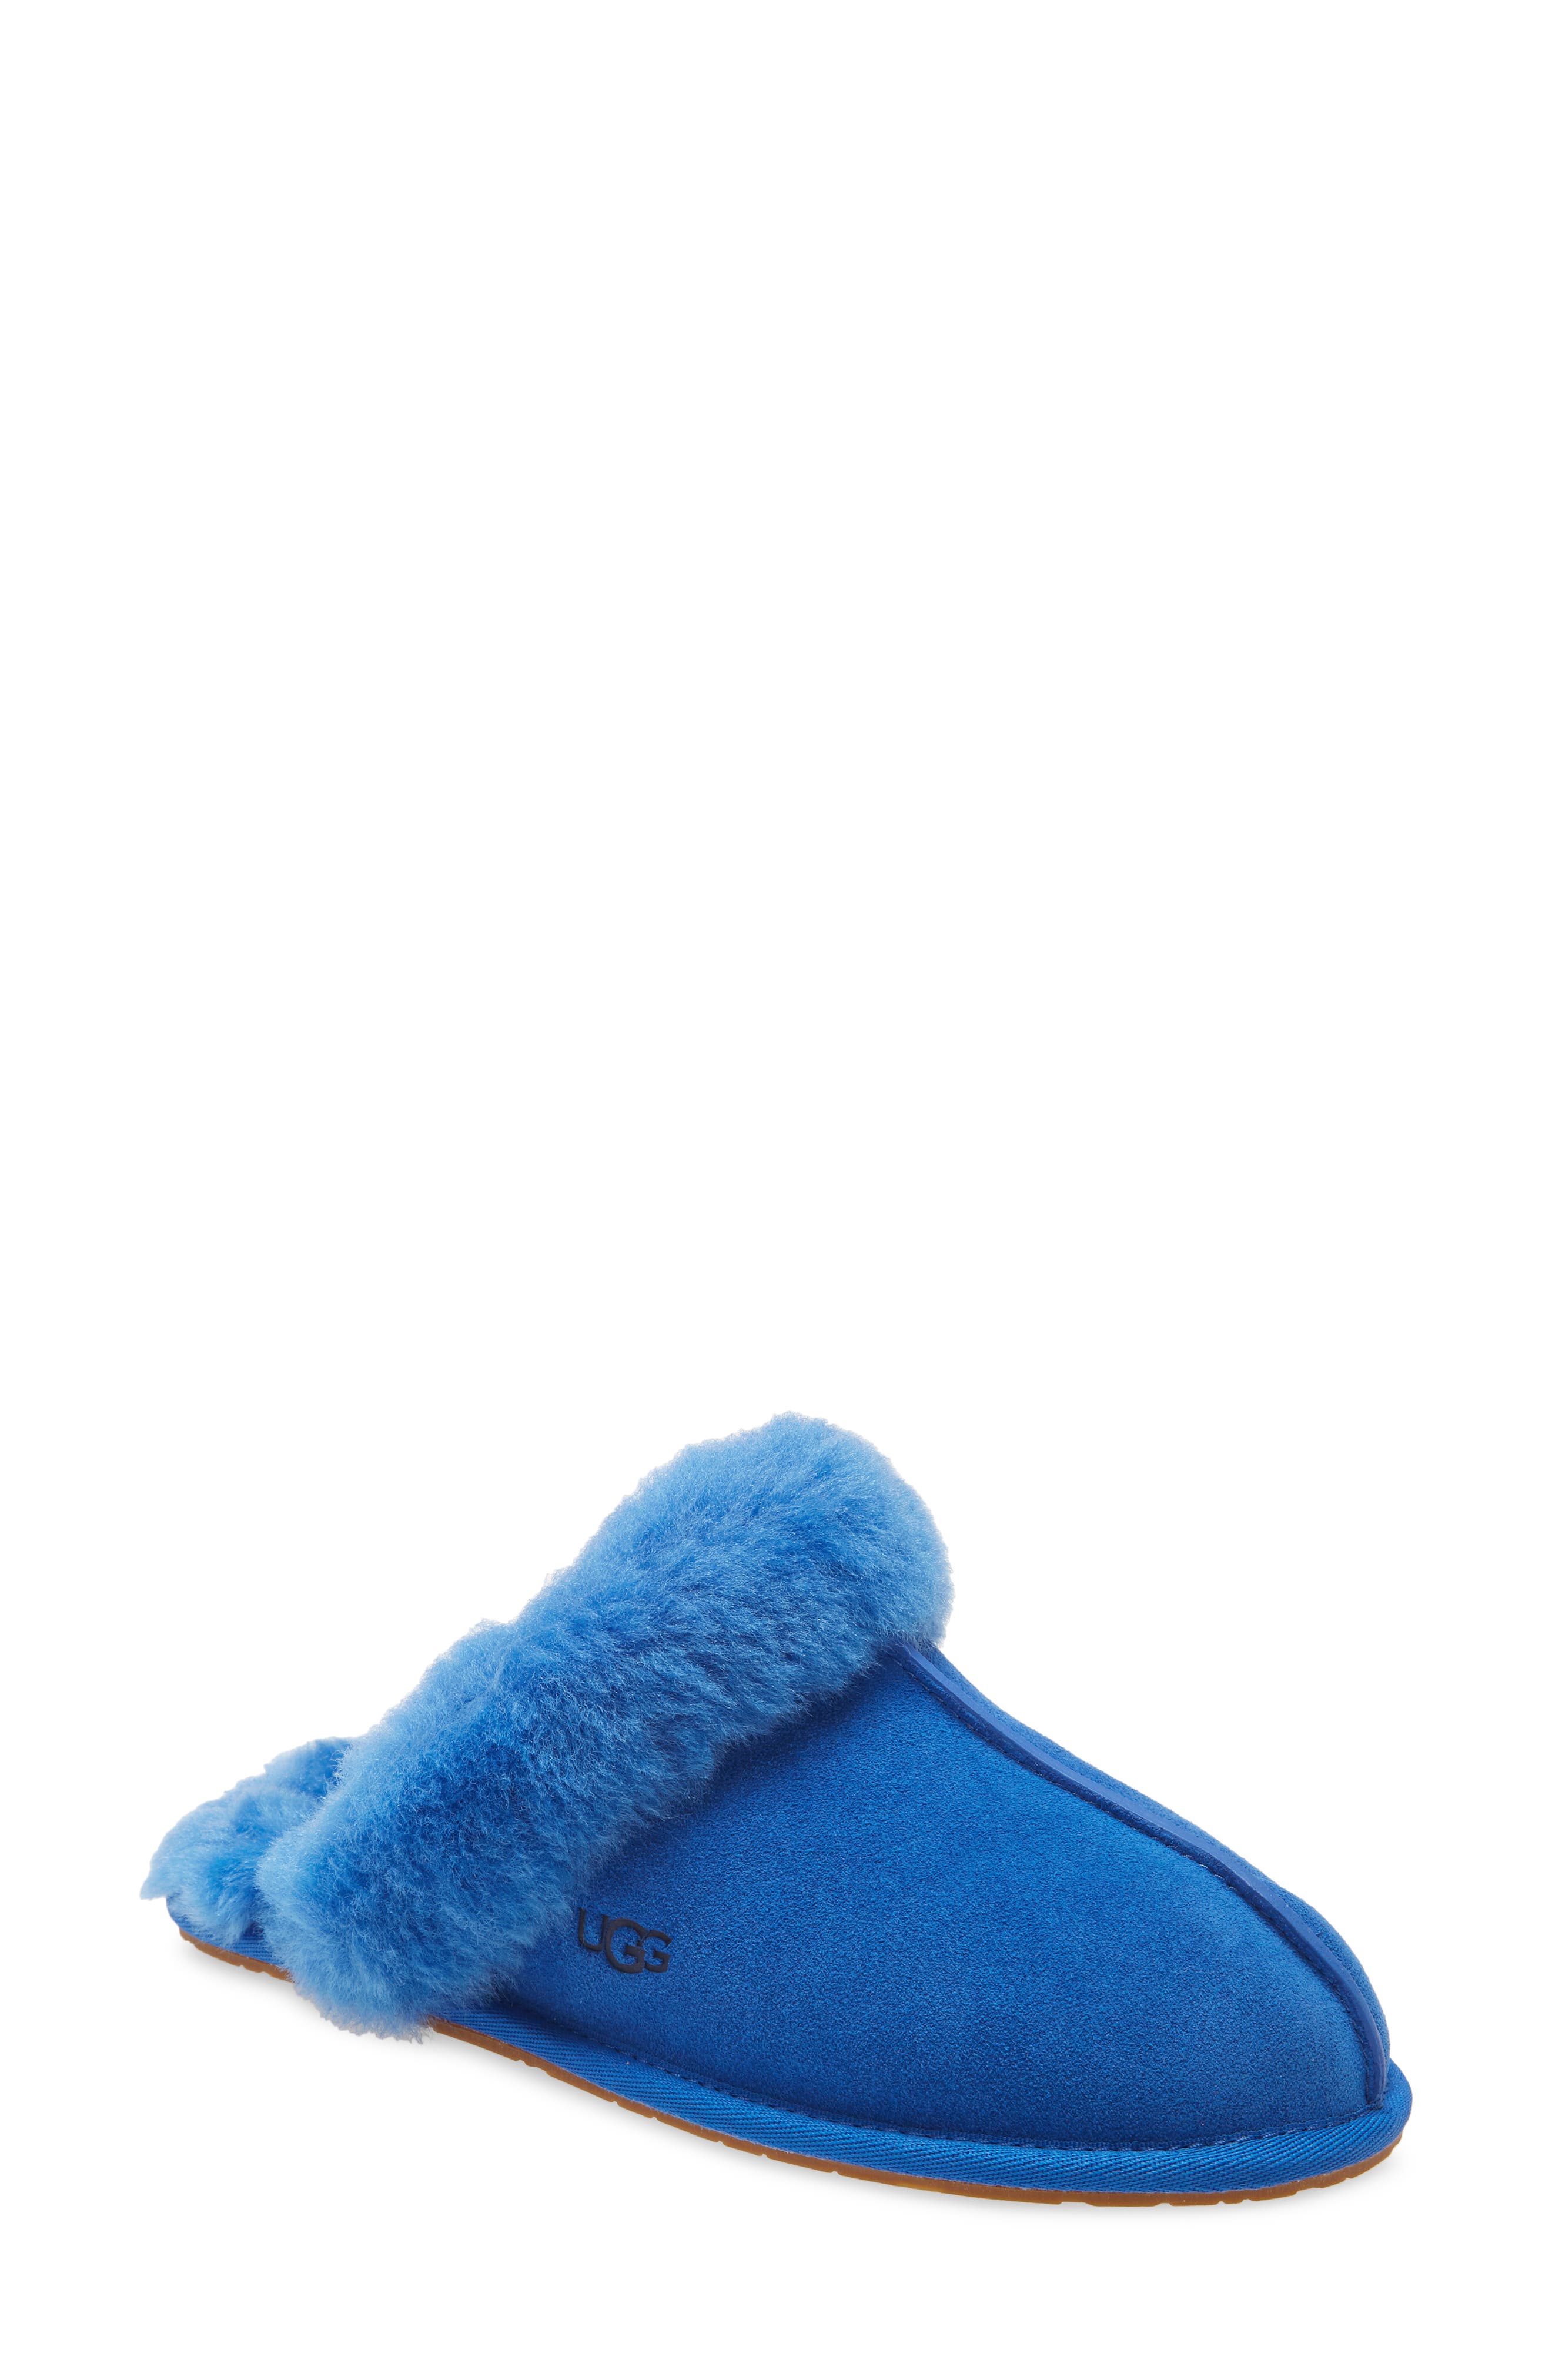 baby blue slippers